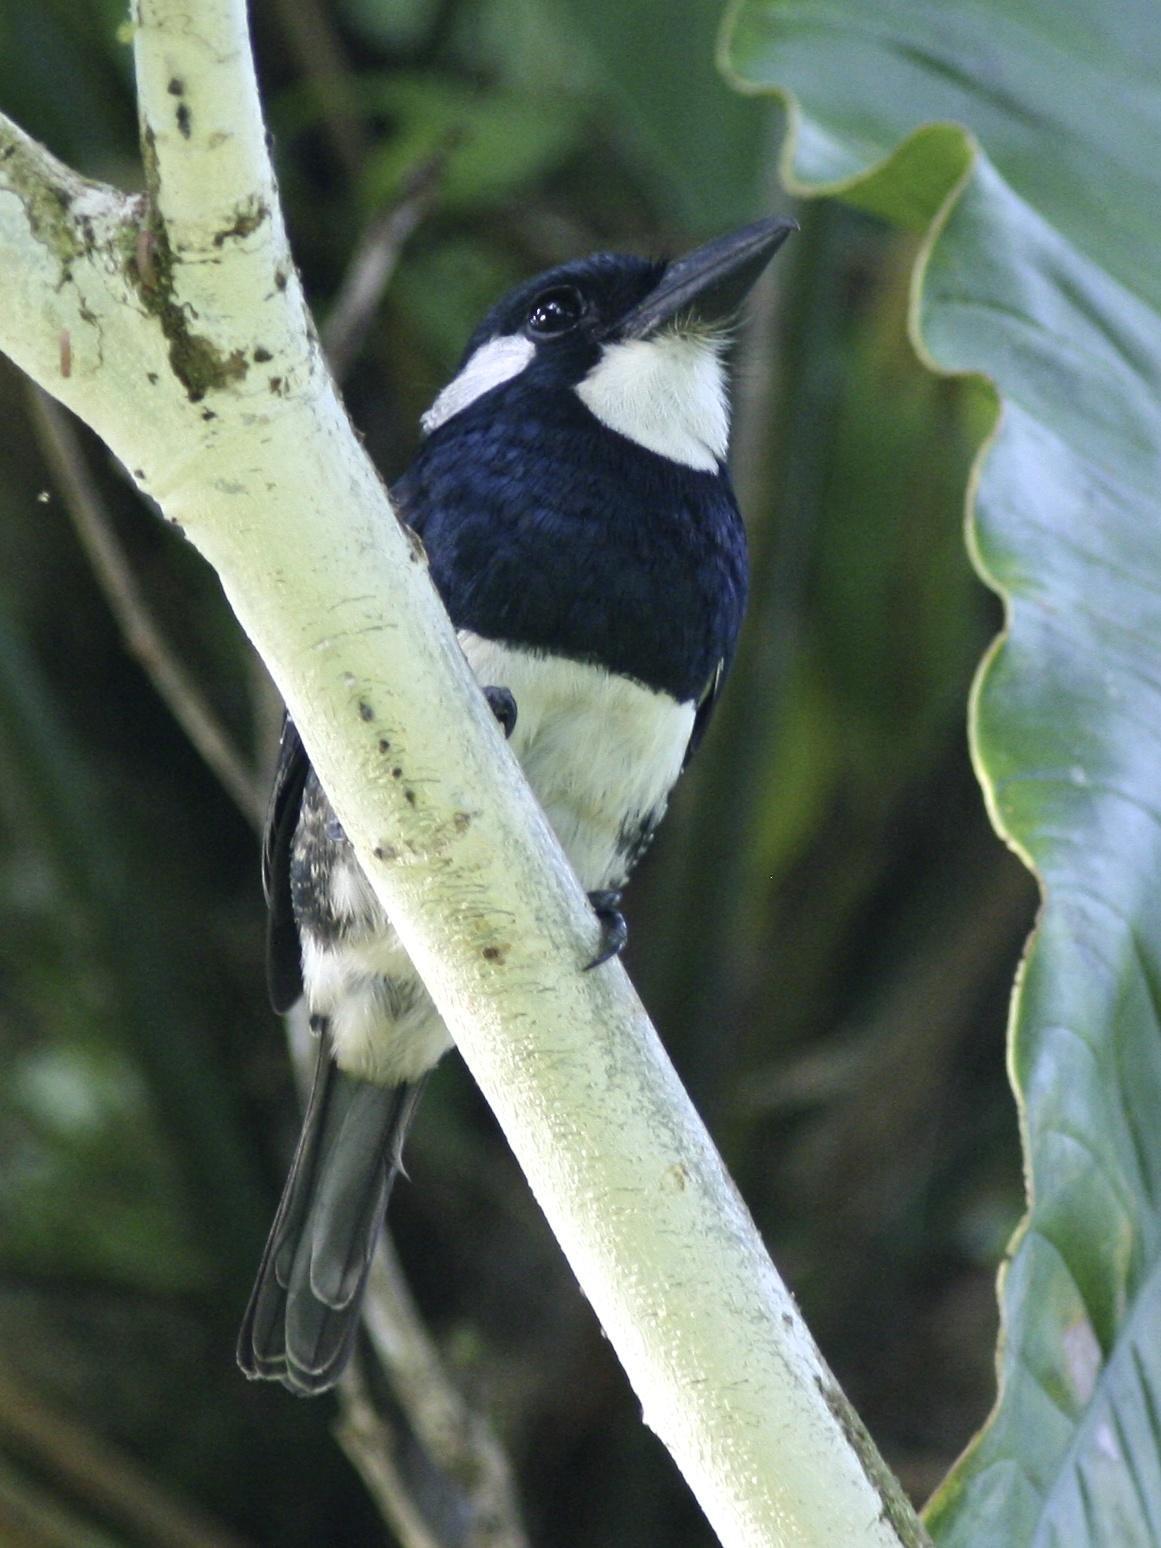 Black-breasted Puffbird Photo by Nicole Desnoyers